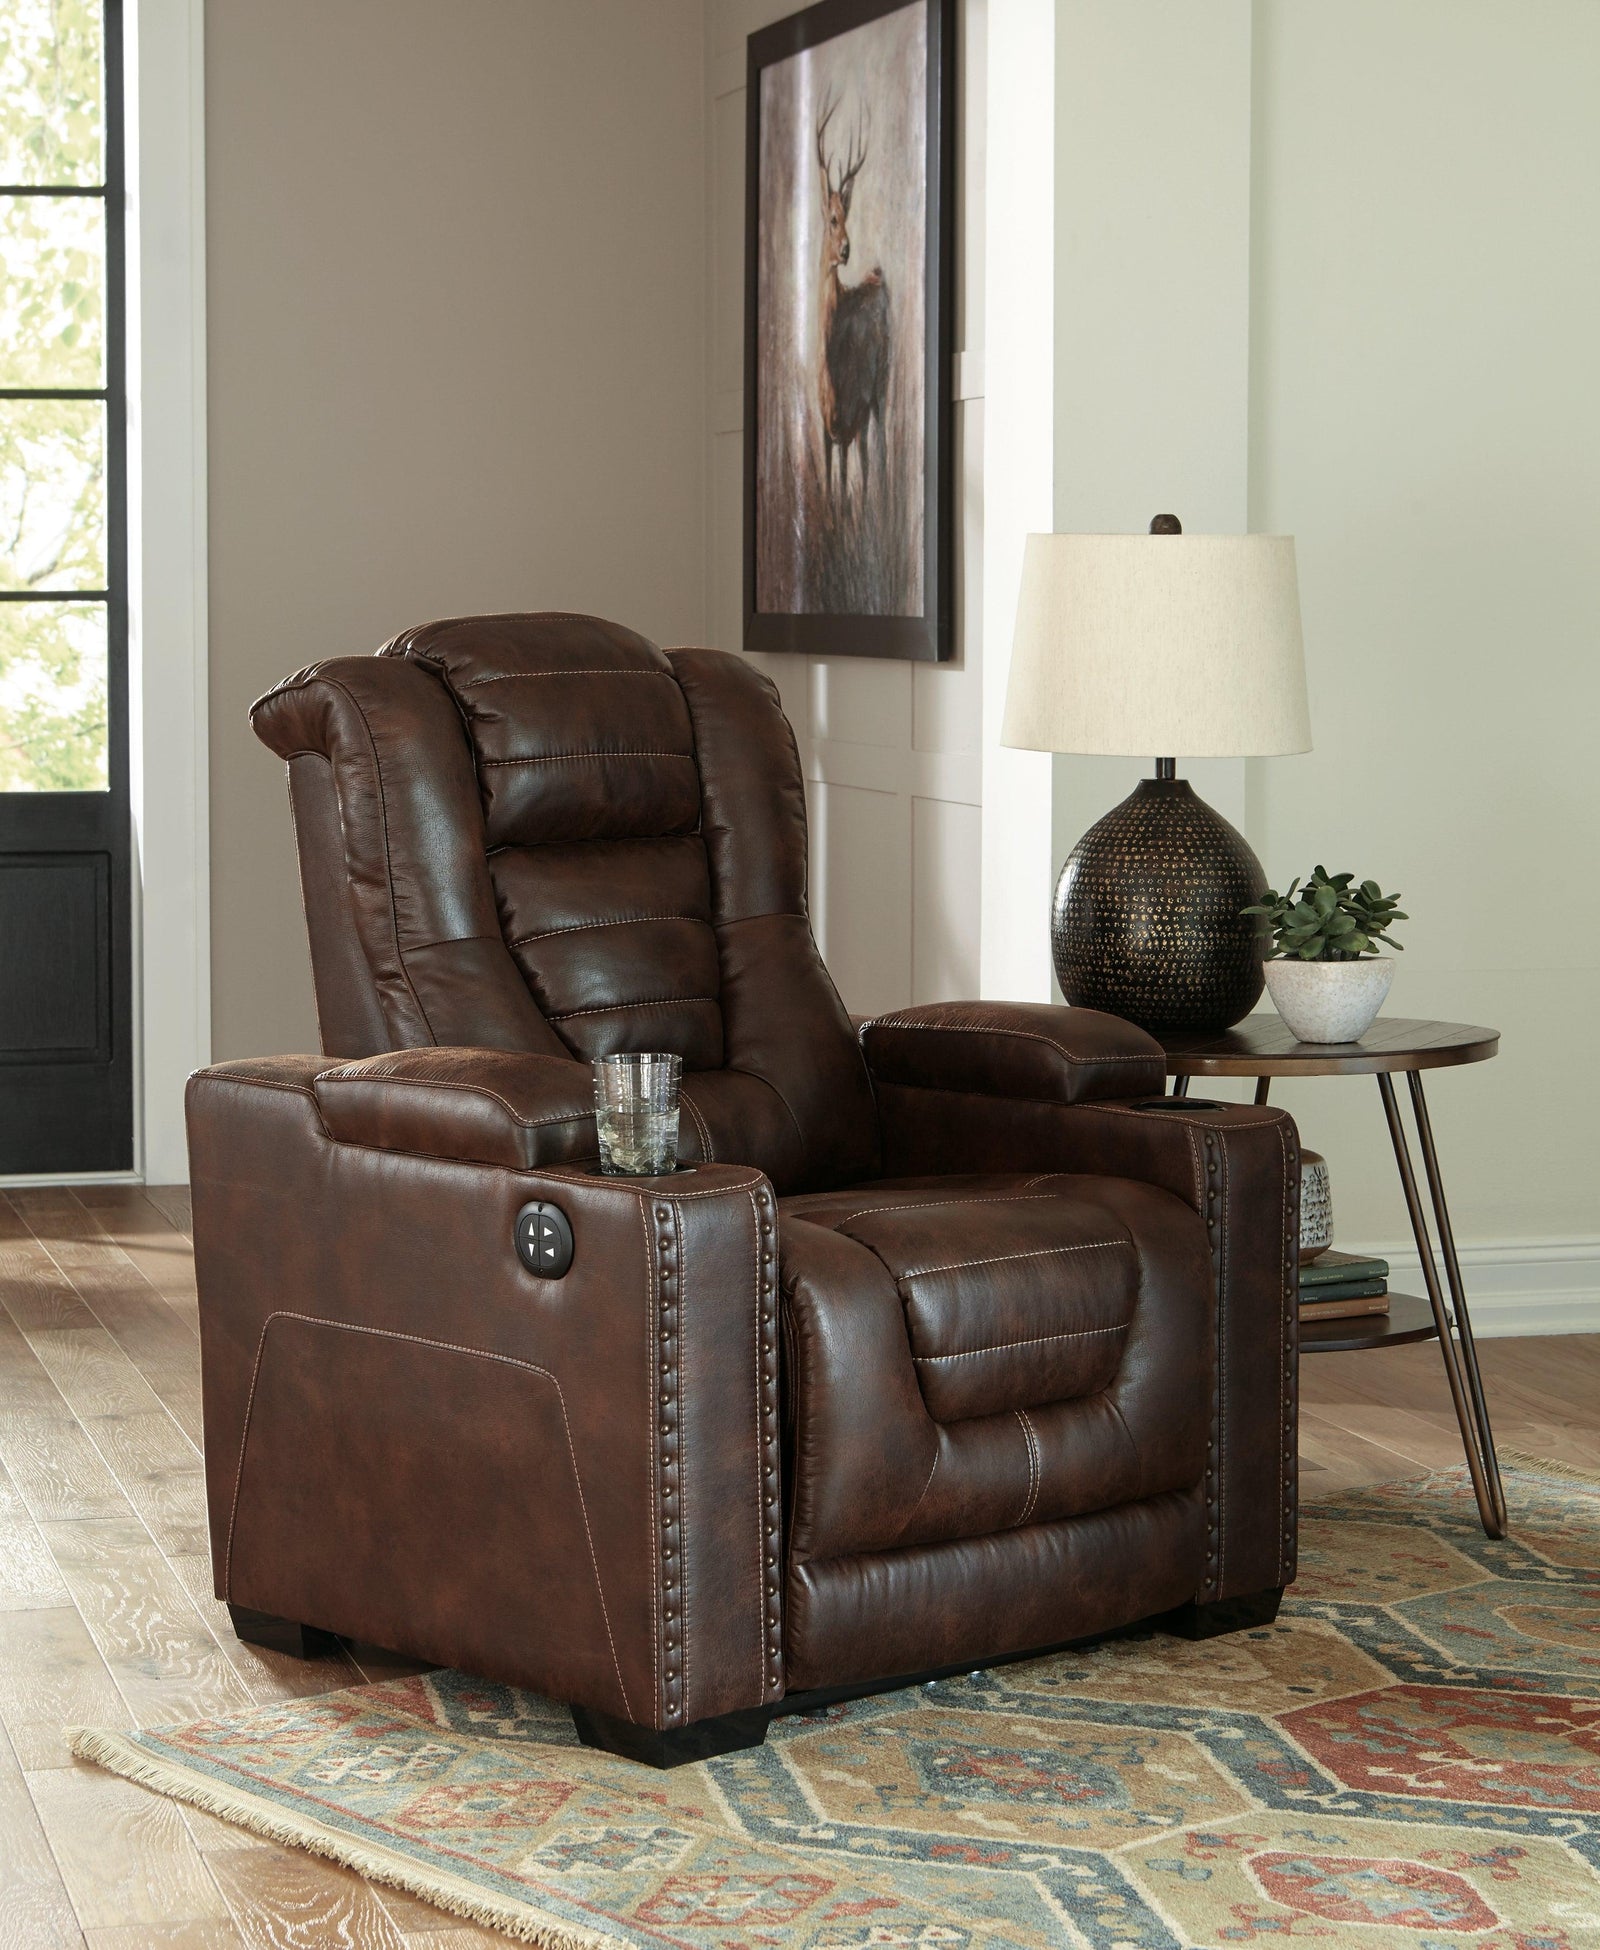 Owner's Box Thyme Faux Leather Power Recliner